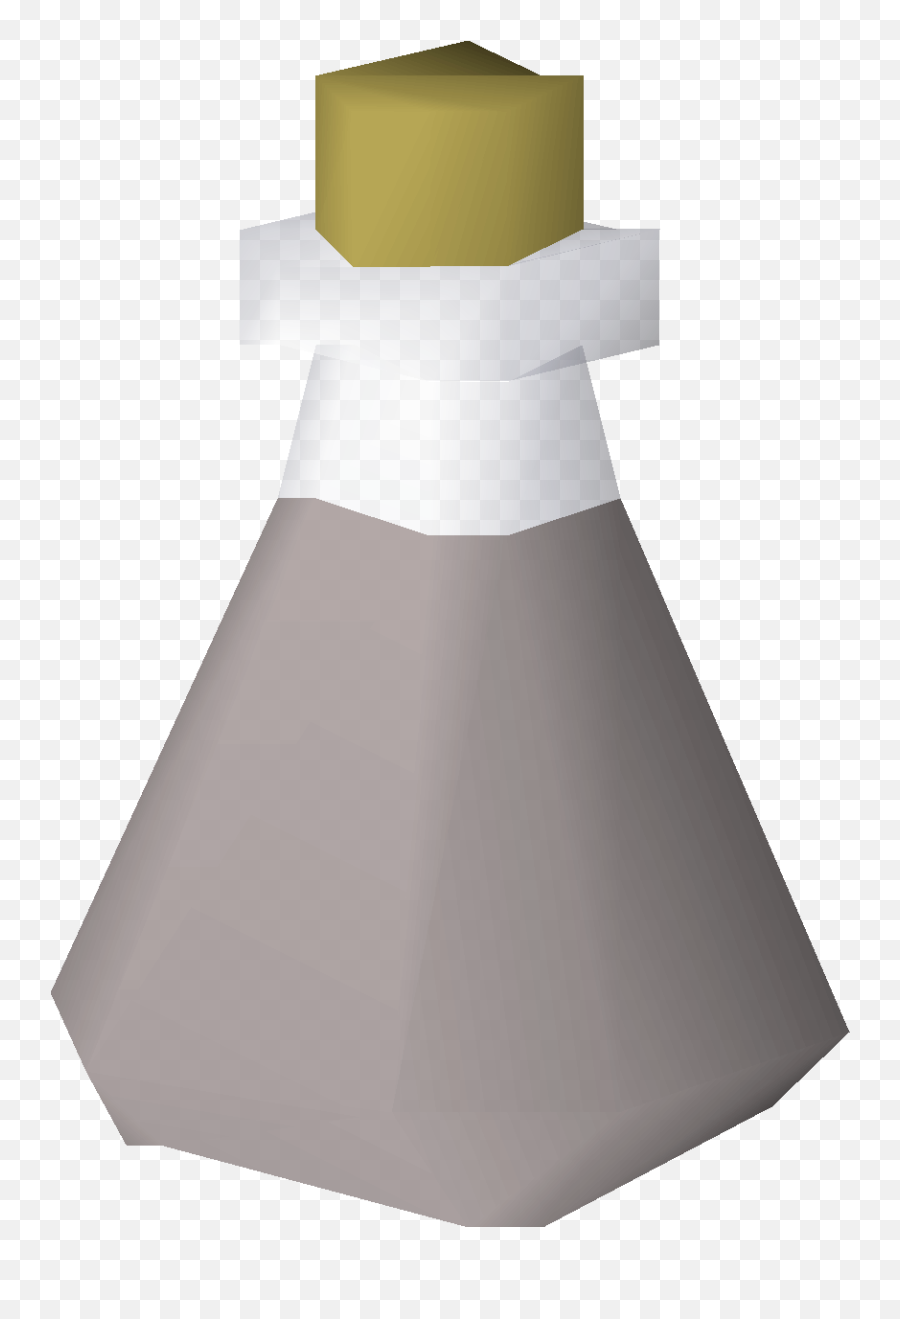 Tin Ore Powder - Osrs Wiki Vial Runescape Png,Powder Png